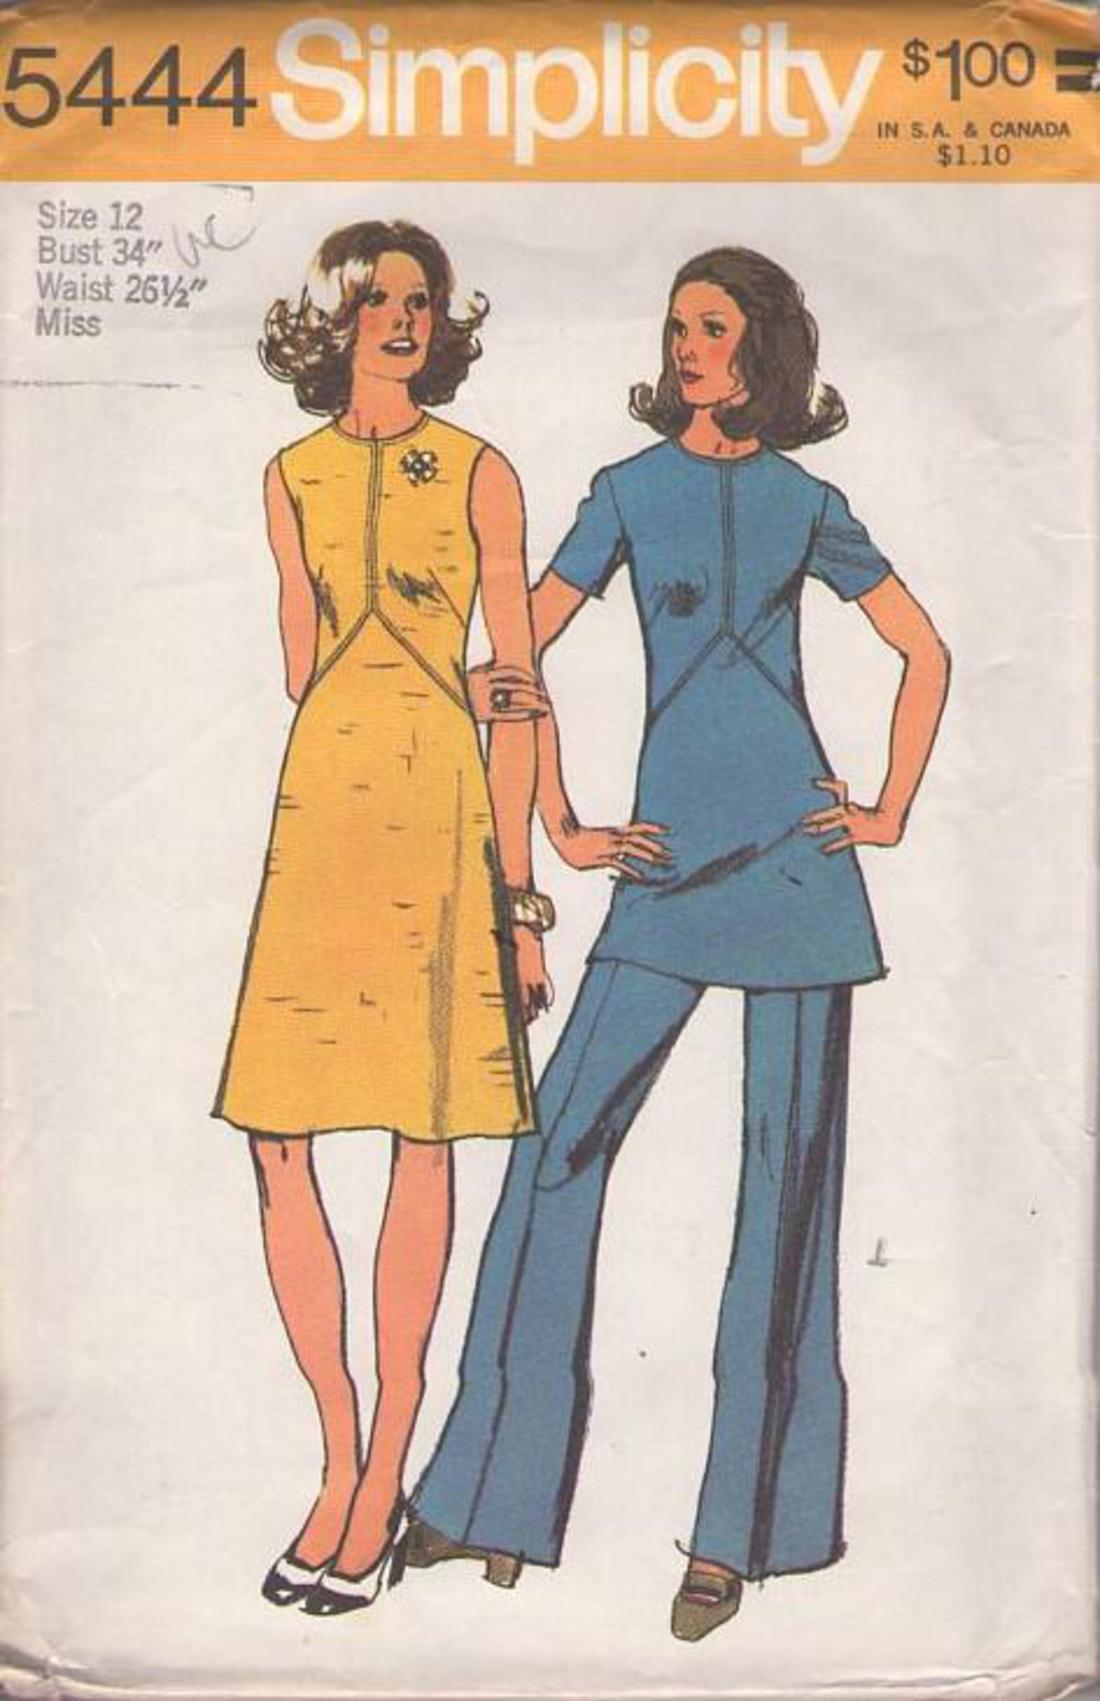 Simplicity 5444 Vintage 70's Sewing Pattern FLATTERING FIT Y Chevron  Stitching Mod Tunic Top & Flared Bell Pants Pantsuit, Secretary Dress Size  12